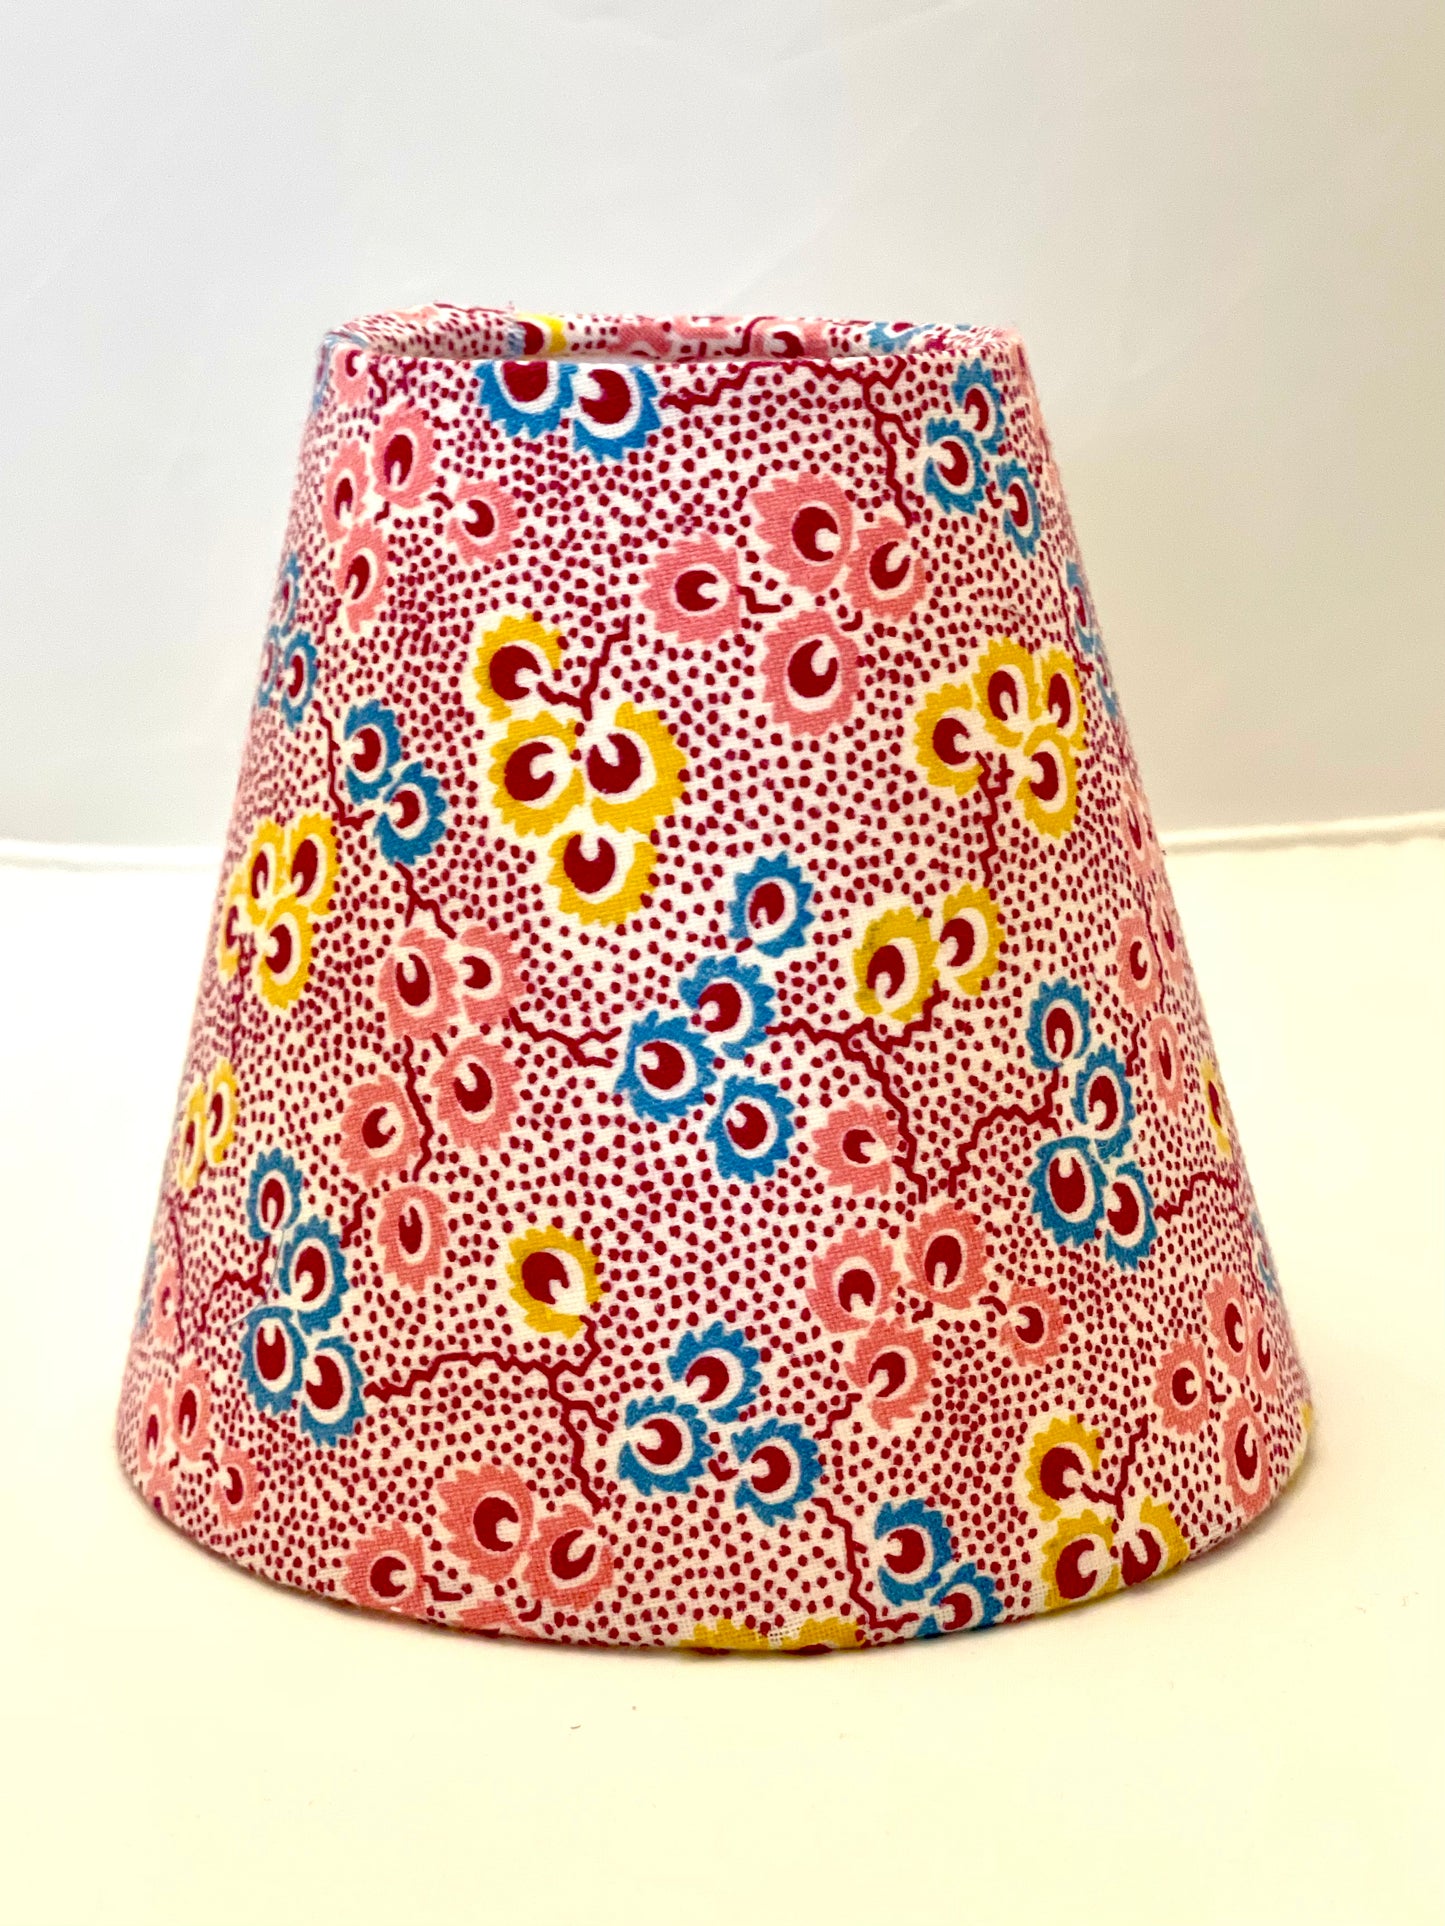 Small Clip-On Lampshade. Vintage French Fabric from the 1930's. Shades of Red, Pink, Teal, and Mustard.